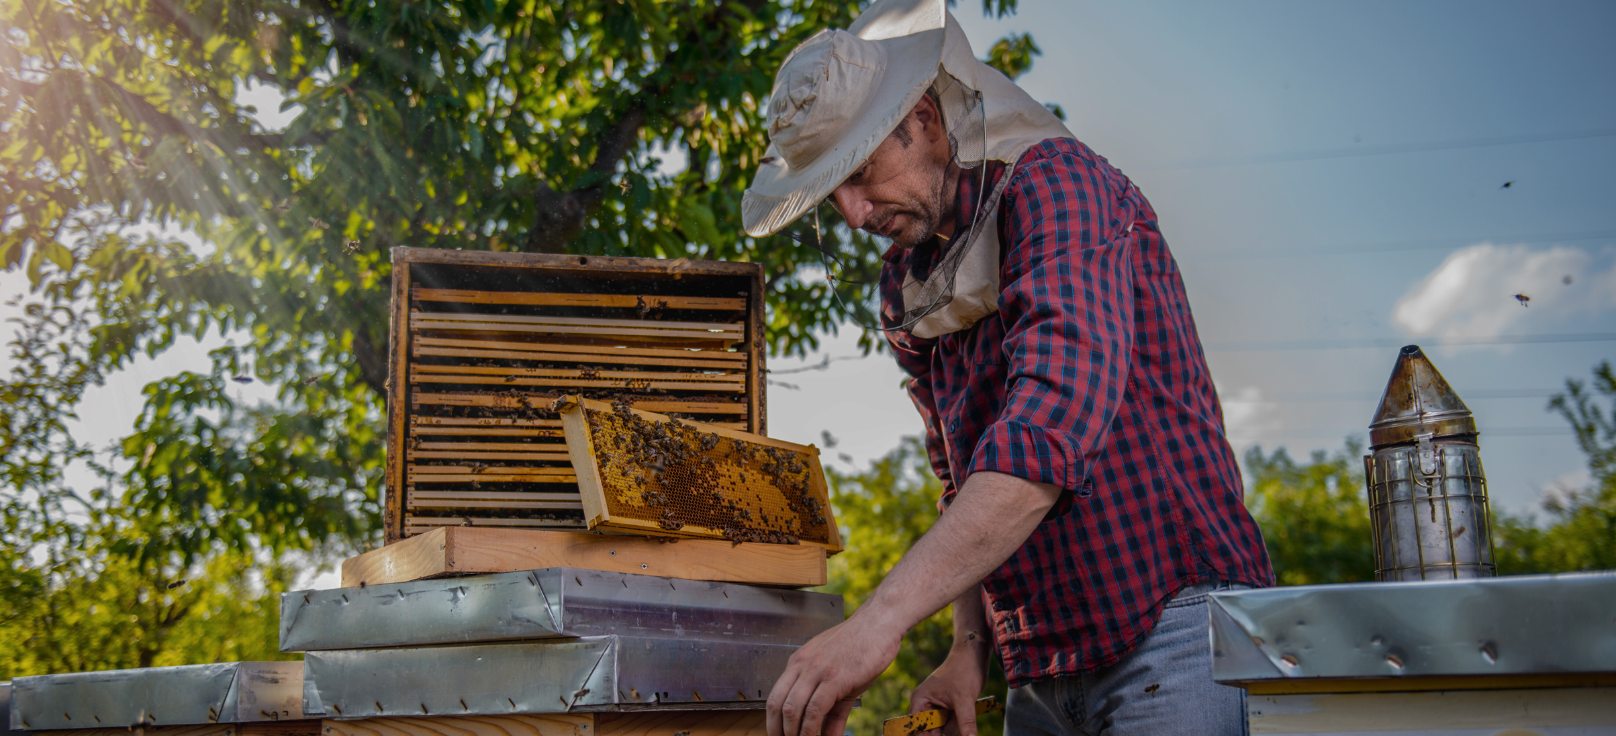 Beekeeping Equipment: Covering the basic tools & protective gear needed for beekeeping